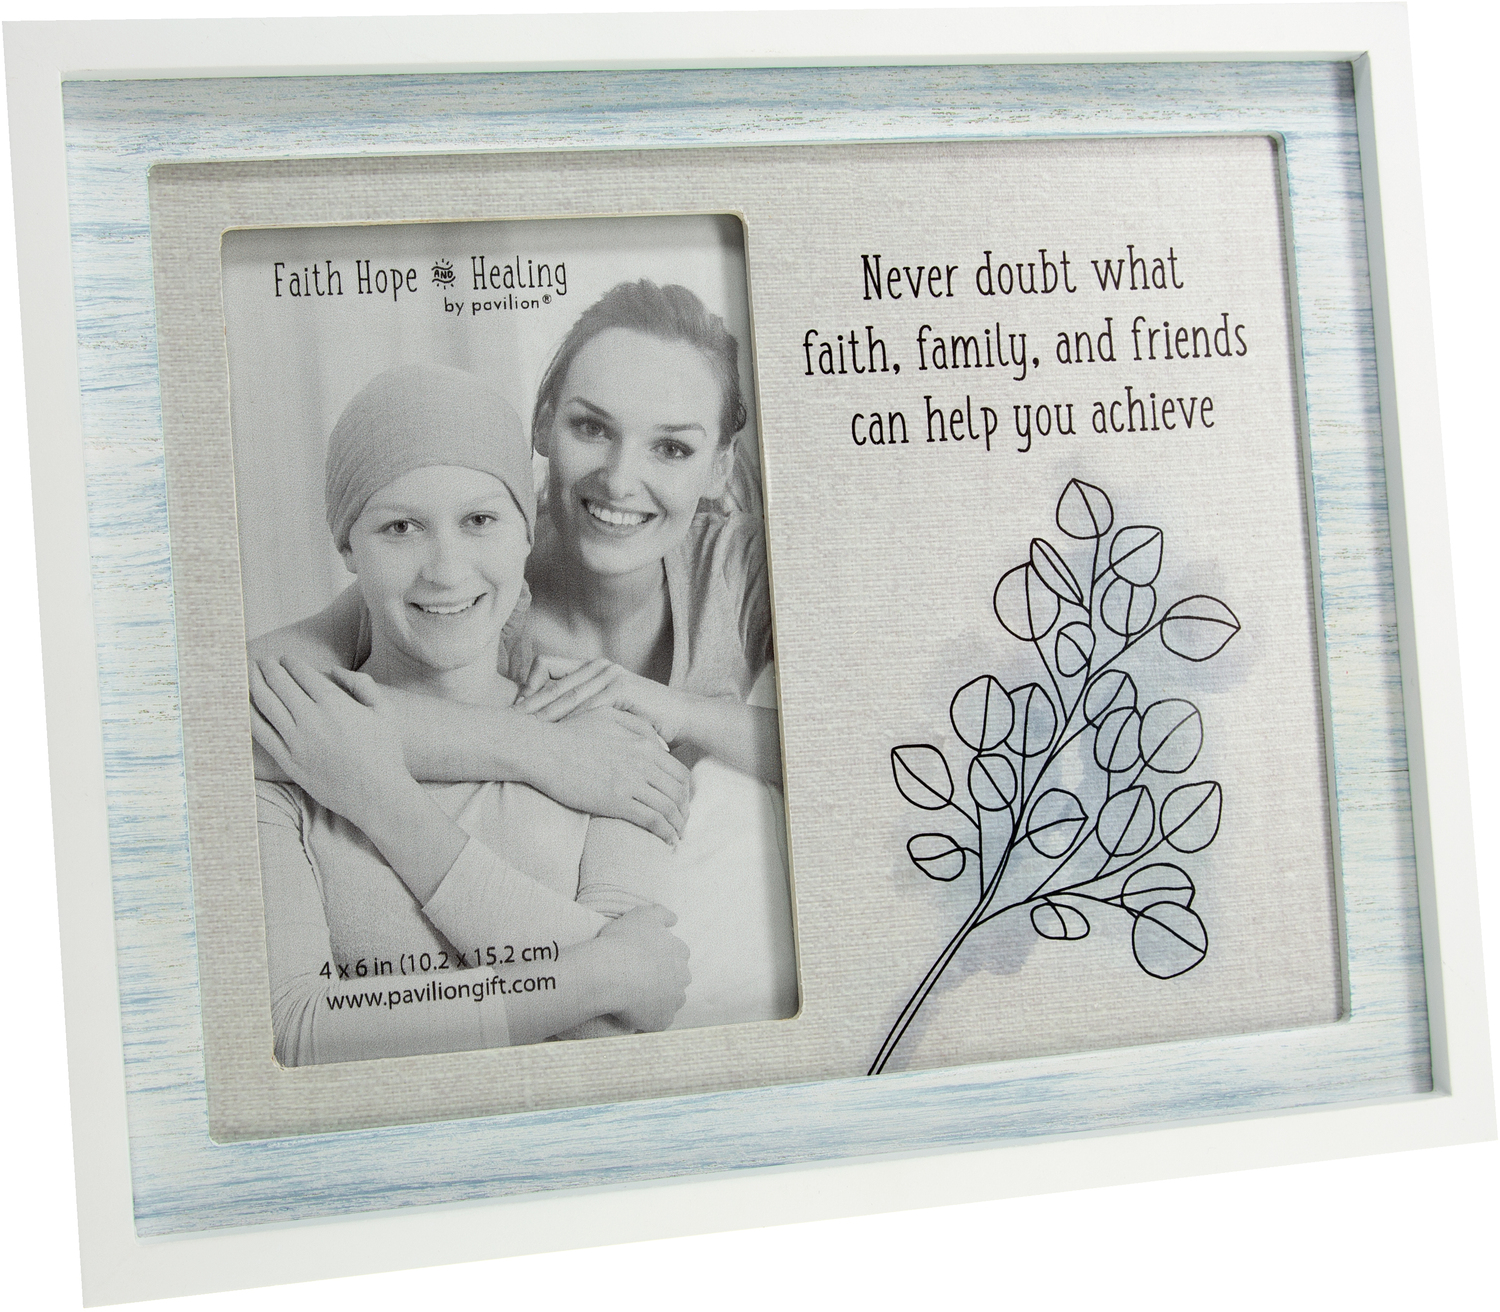 Never Doubt by Faith Hope and Healing - Never Doubt - 9.75" x 8.25" Frame
(Holds 4" x 6" Photo)